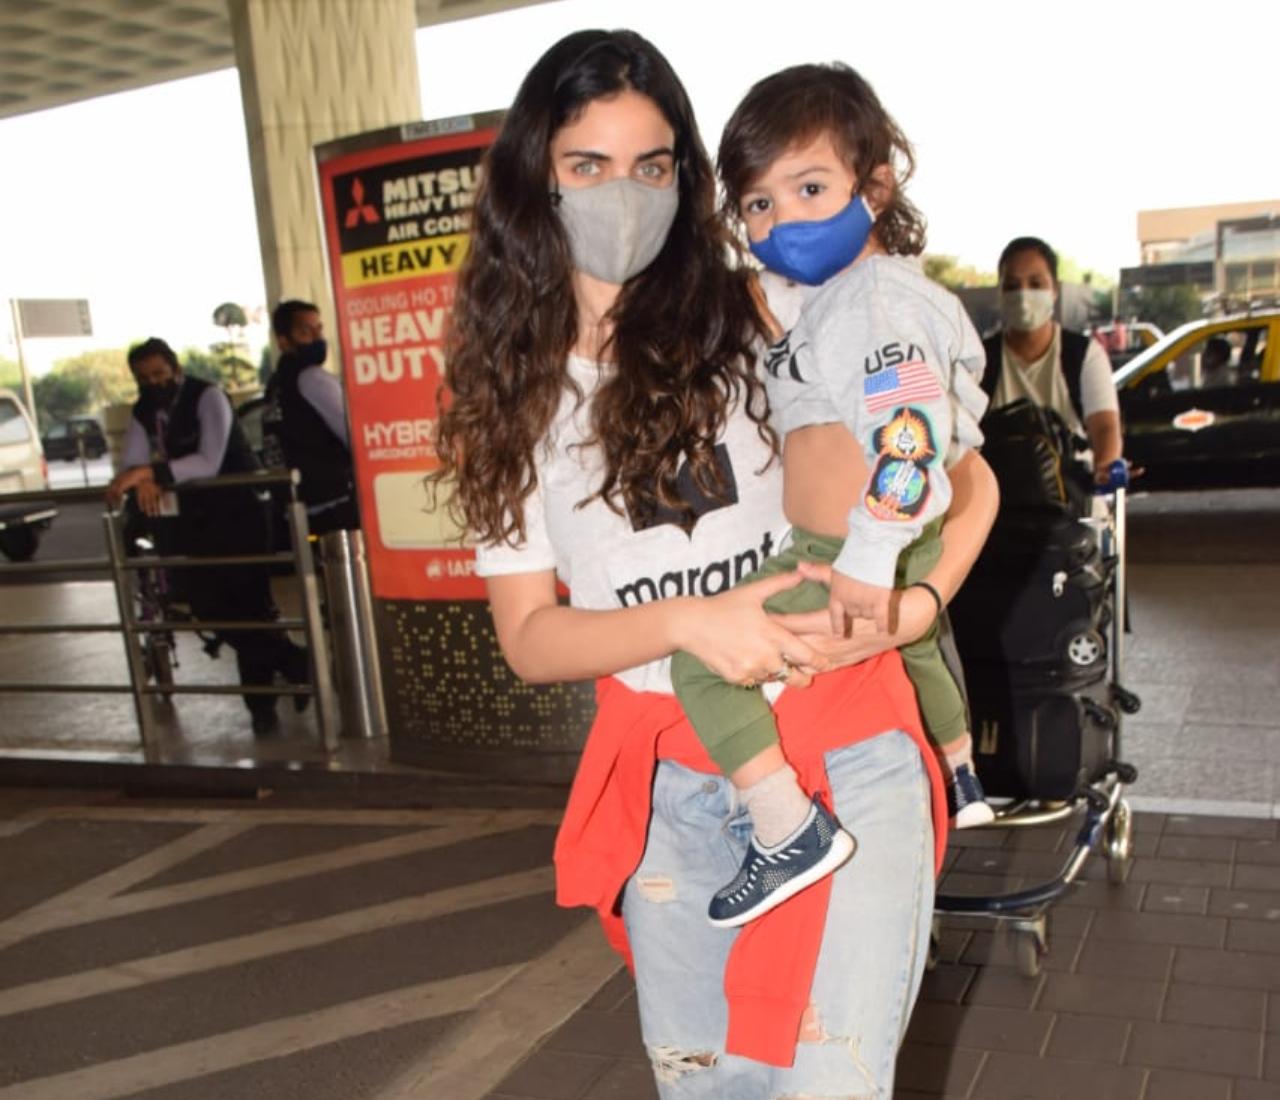 Gabriella Demetriades was also clicked with her son Arik. Gabriella, who is in a relationship with actor Arjun Rampal regularly shares an adorable picture of the toddler on her Instagram handle.